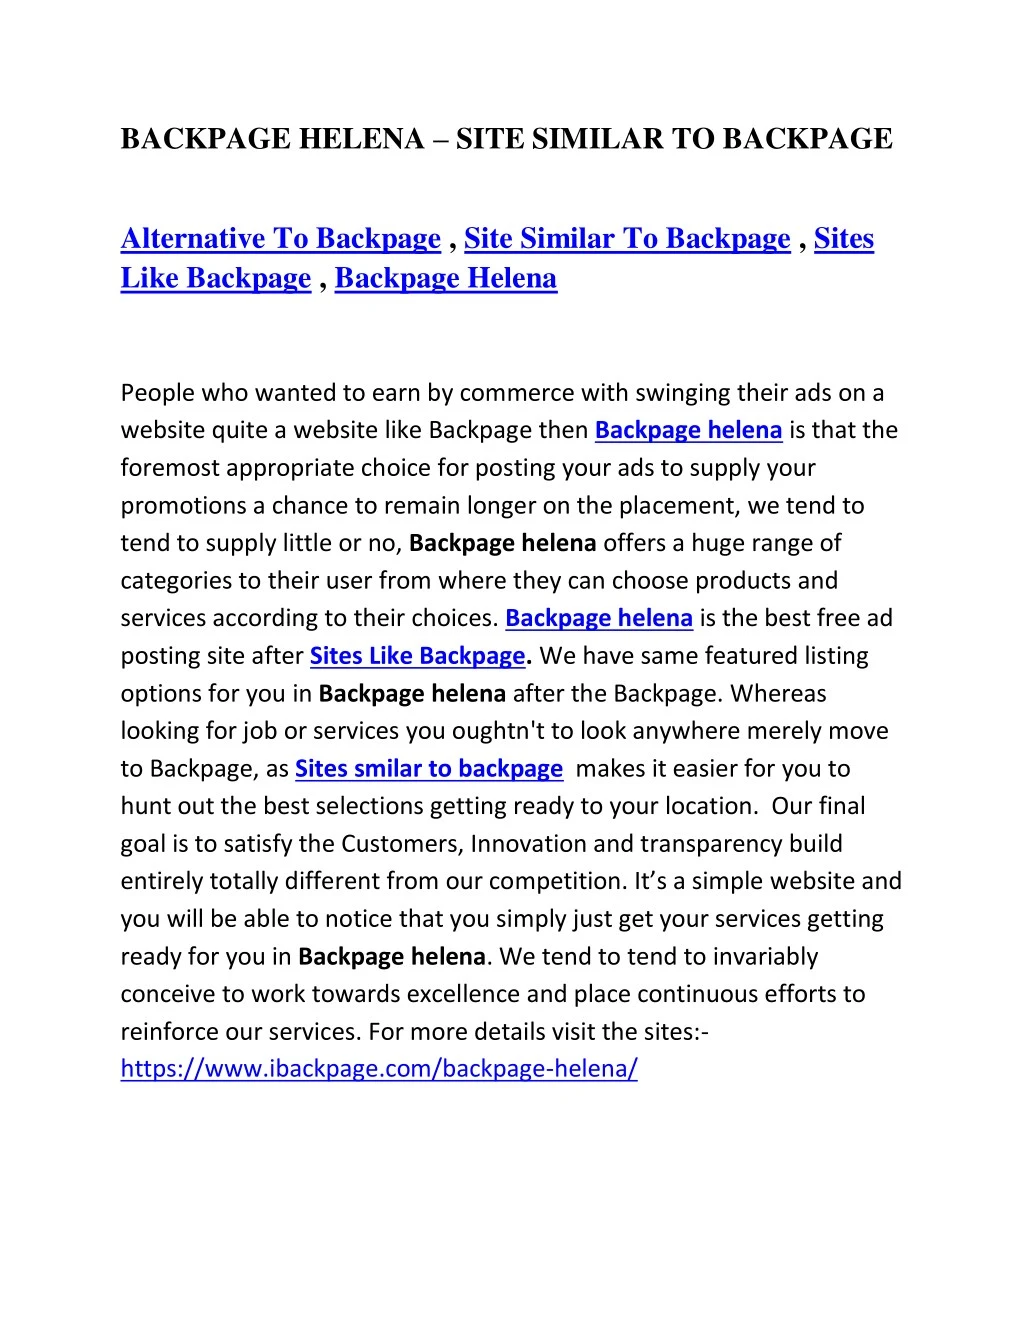 backpage helena site similar to backpage n.